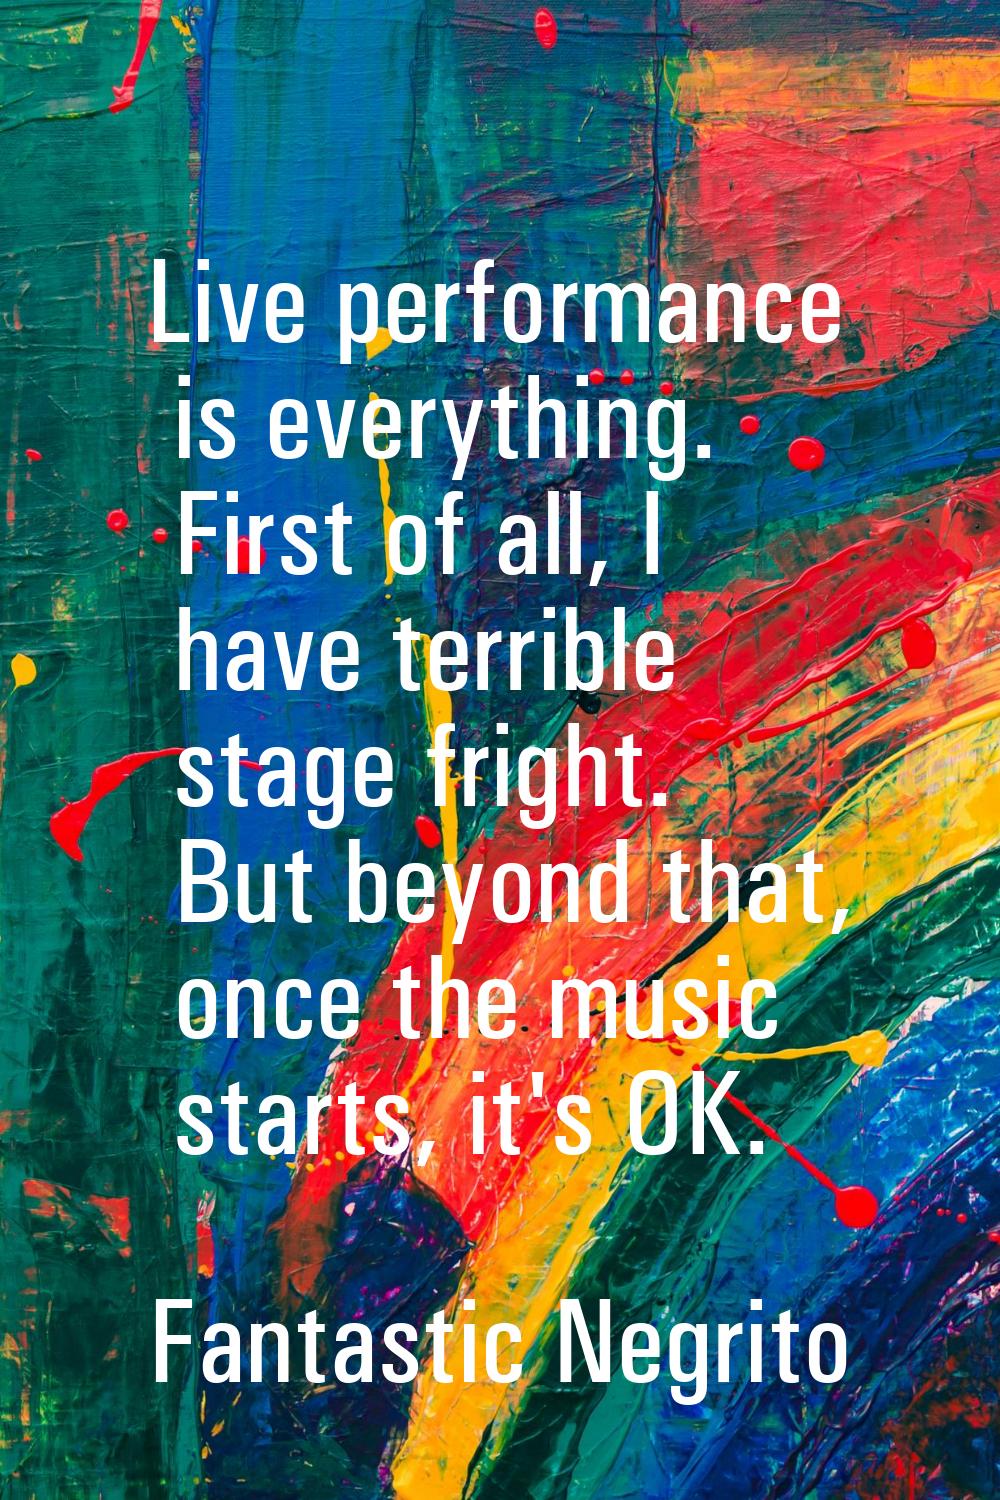 Live performance is everything. First of all, I have terrible stage fright. But beyond that, once t